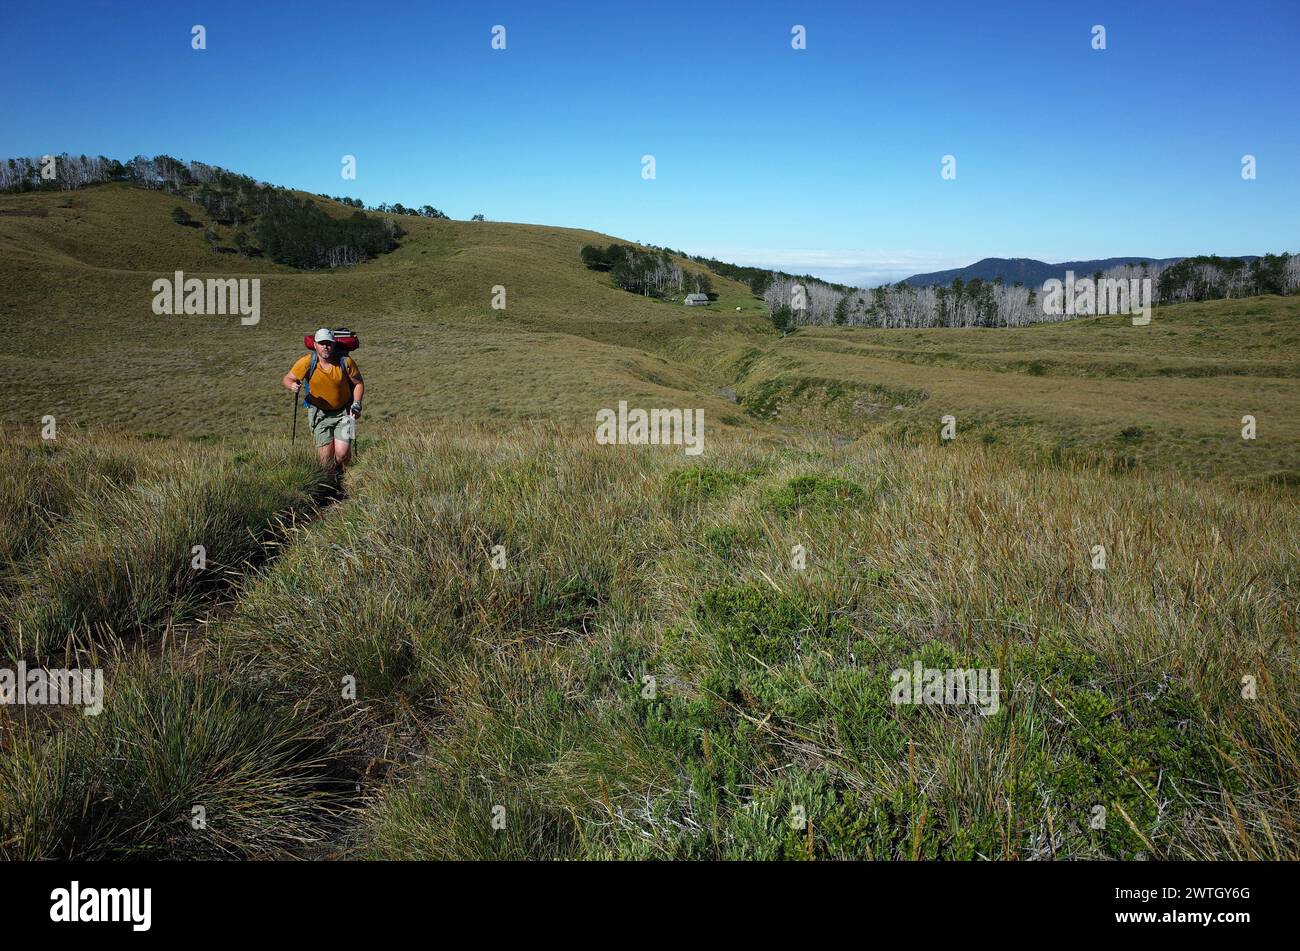 Man tourist hiking on grassy terrain beautiful hilly landscape in Puyehue National Park, Los Lagos Region, Outdoor activity in Chile Stock Photo